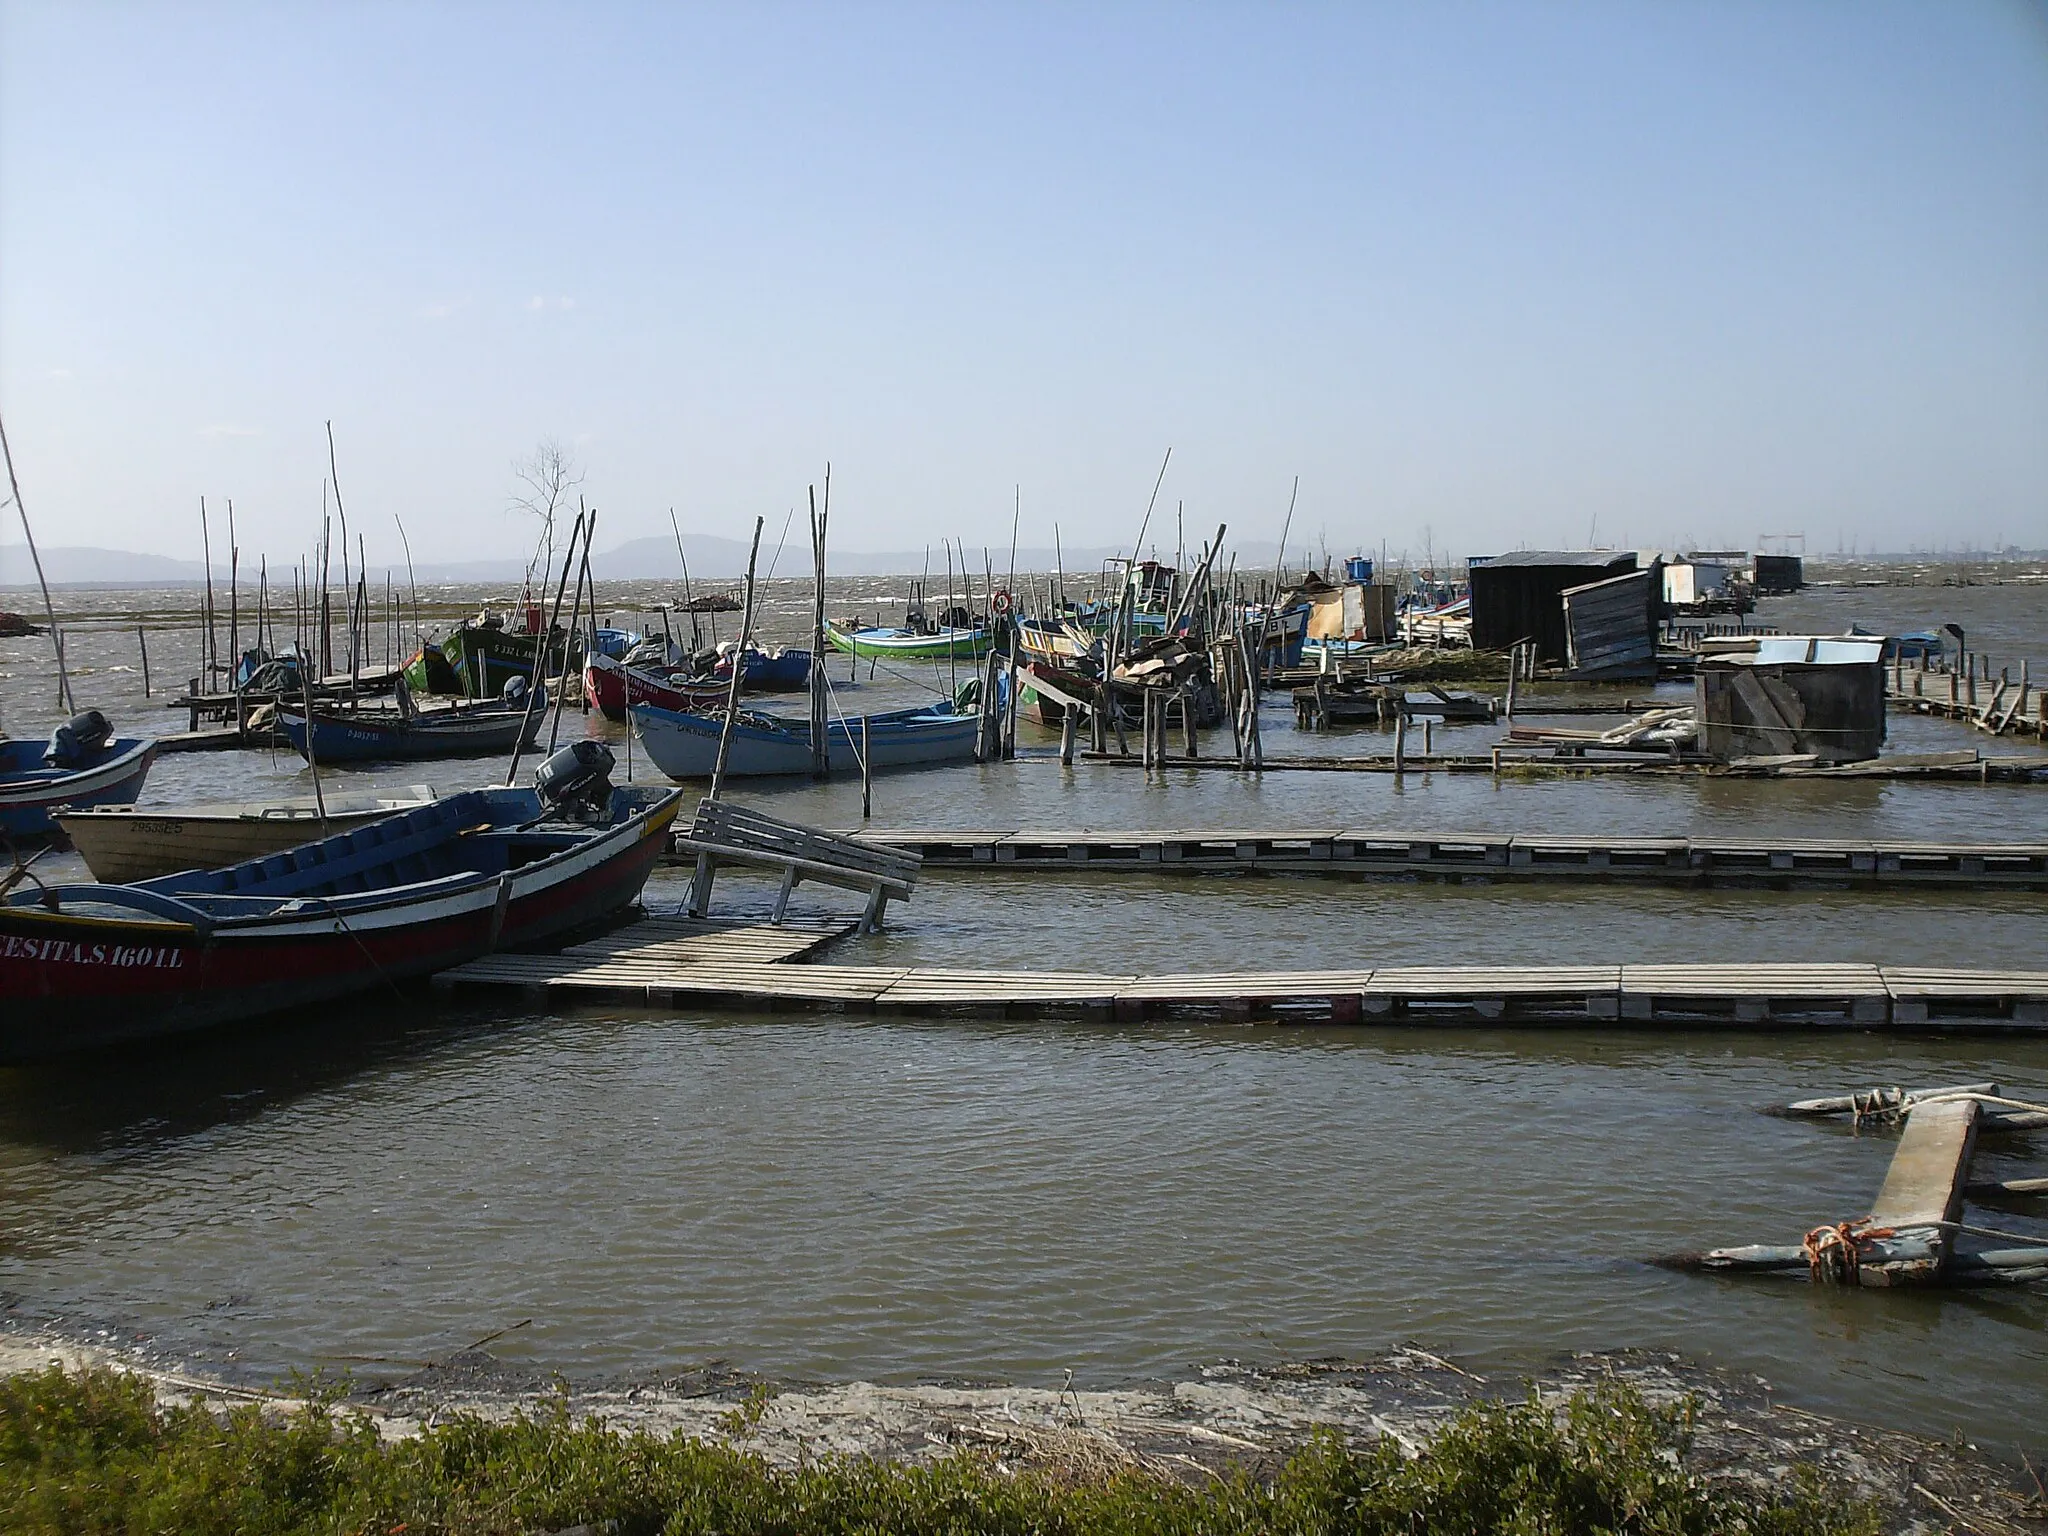 Photo showing: Sado River fishing port in Carrasqueira, Alcácer do Sal, Portugal.